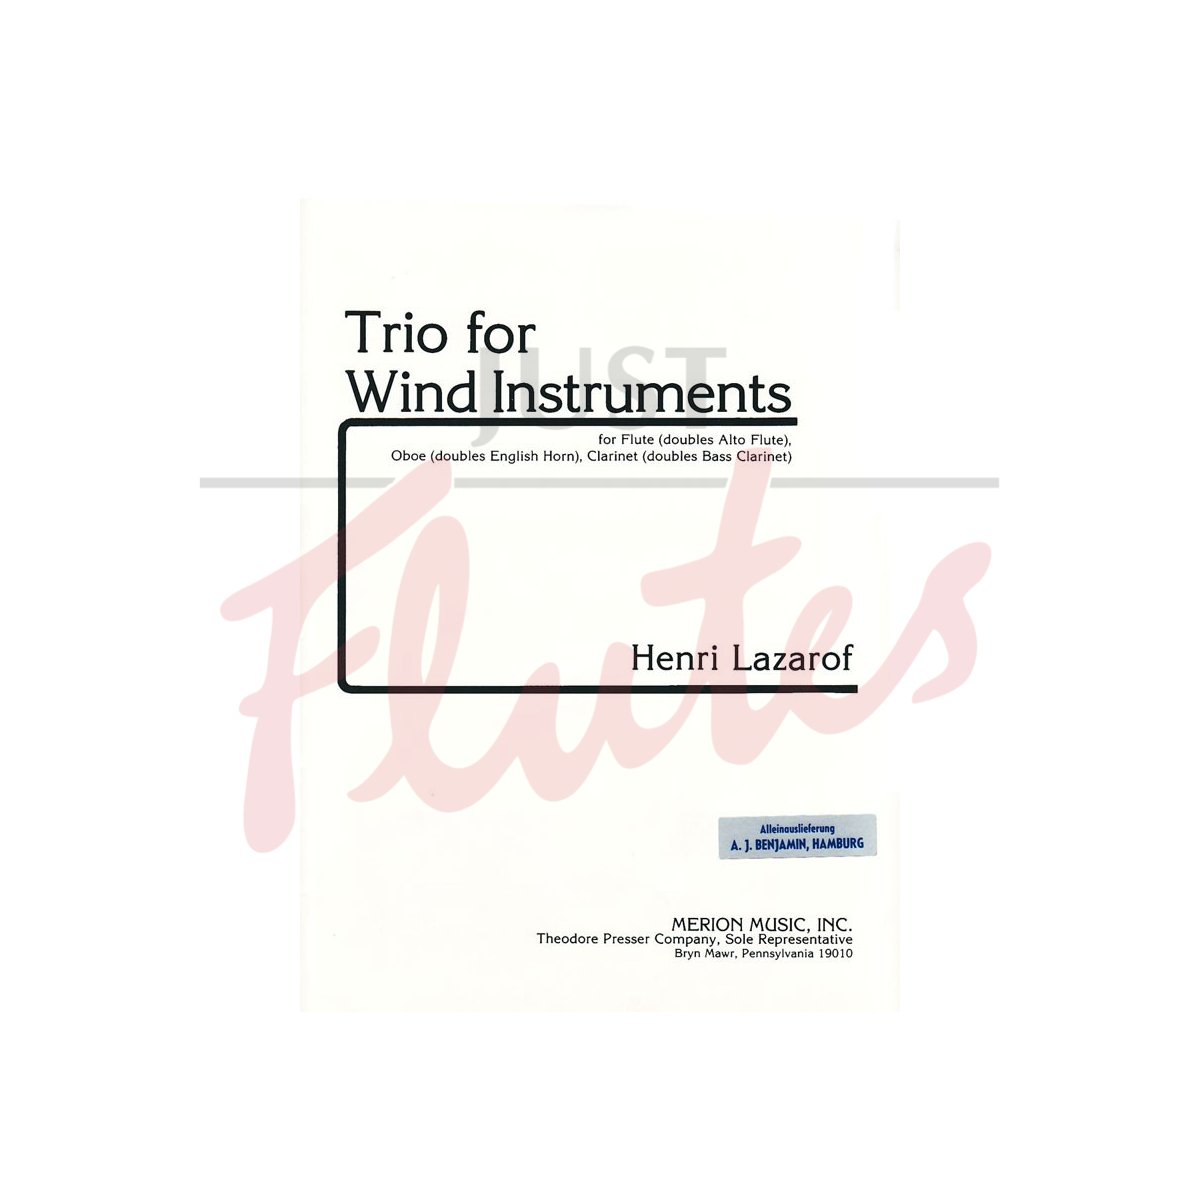 Trio for Wind Instruments